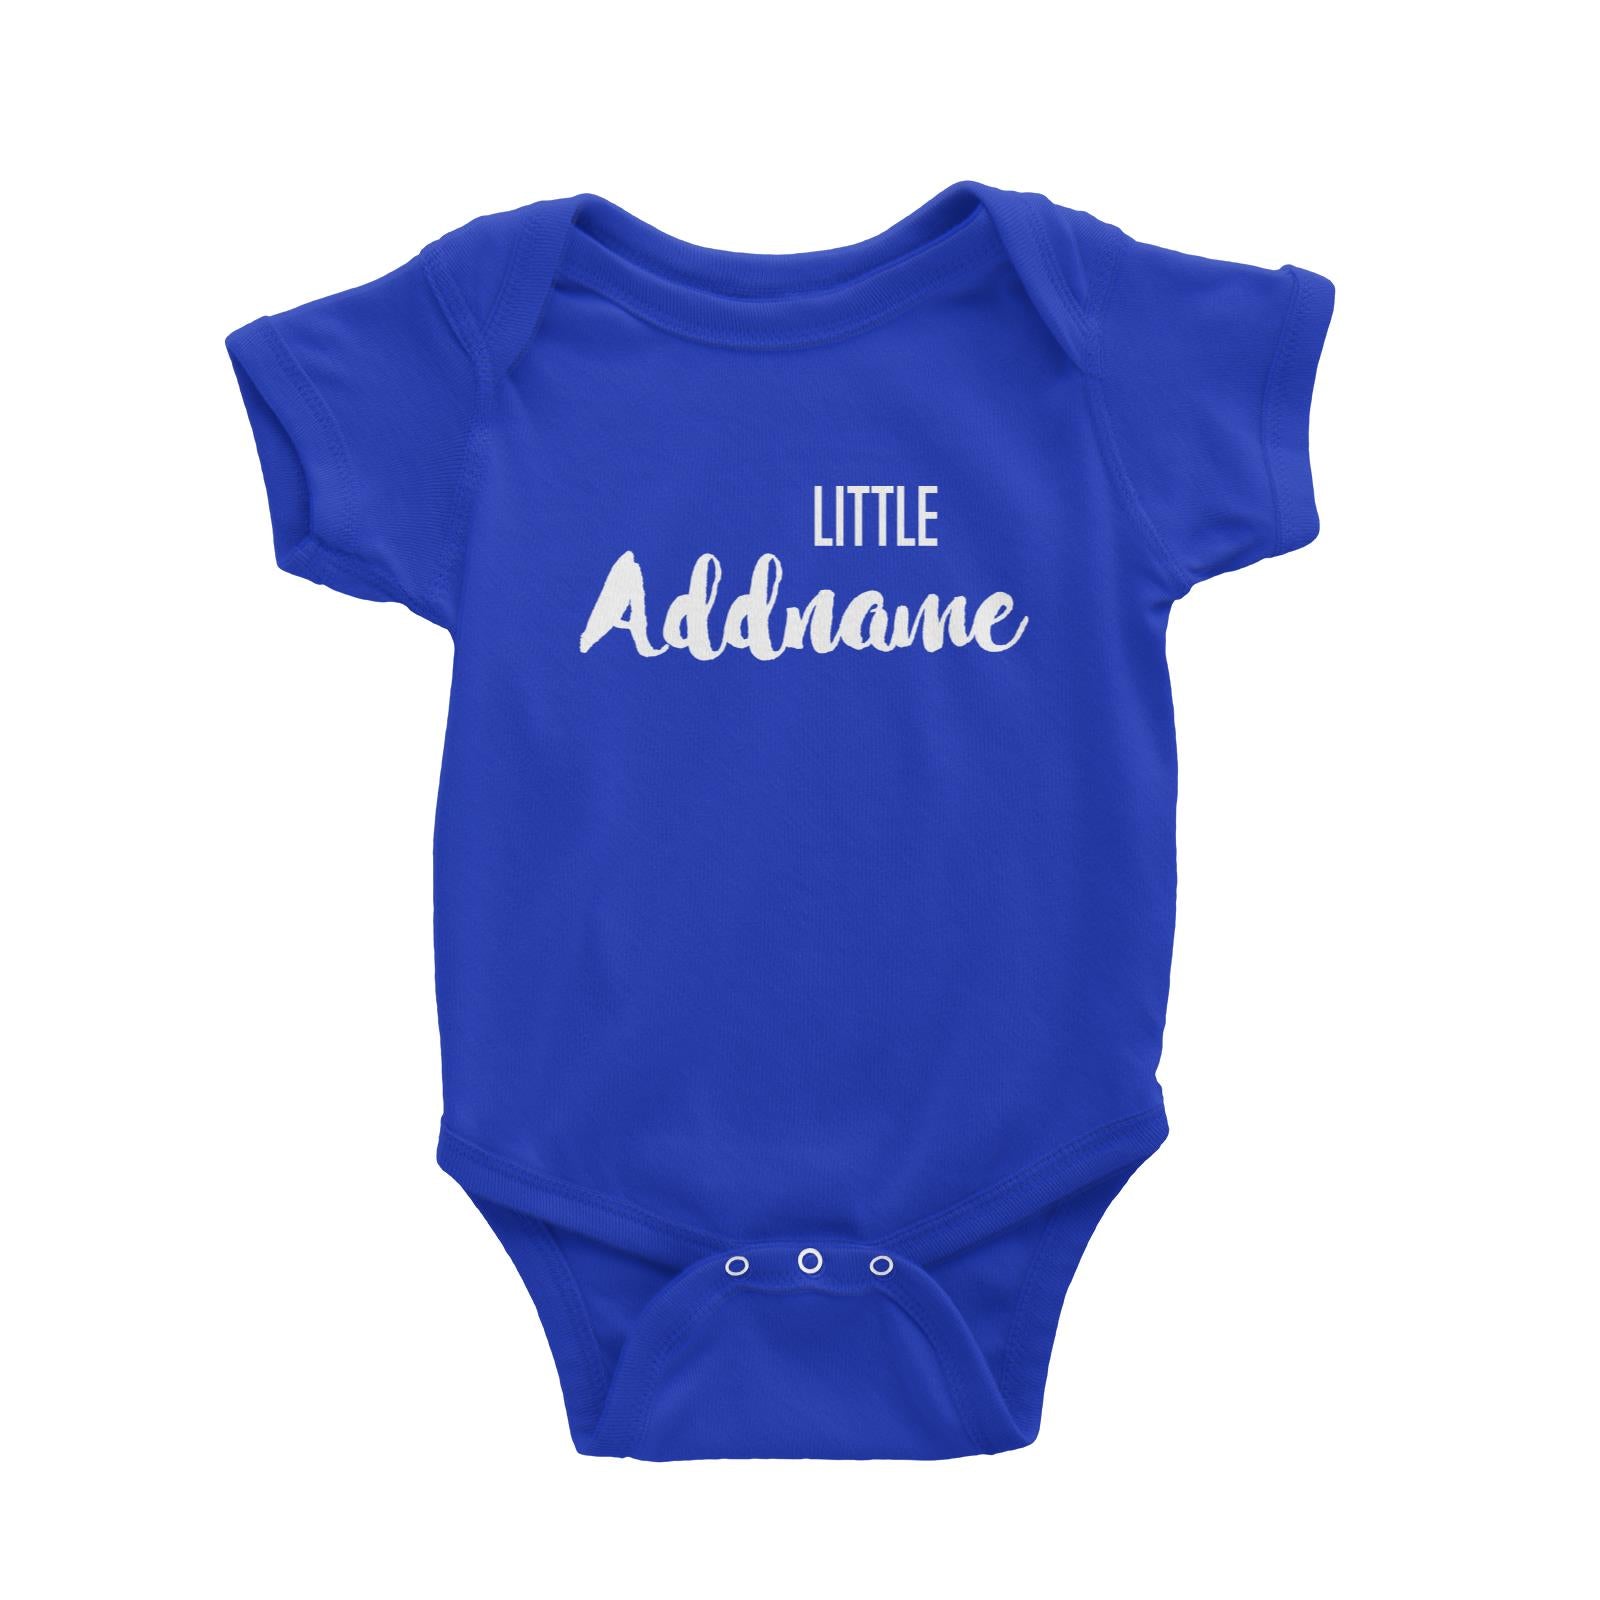 Little Addname in Brush Letters Baby Romper Personalizable Designs Basic Newborn